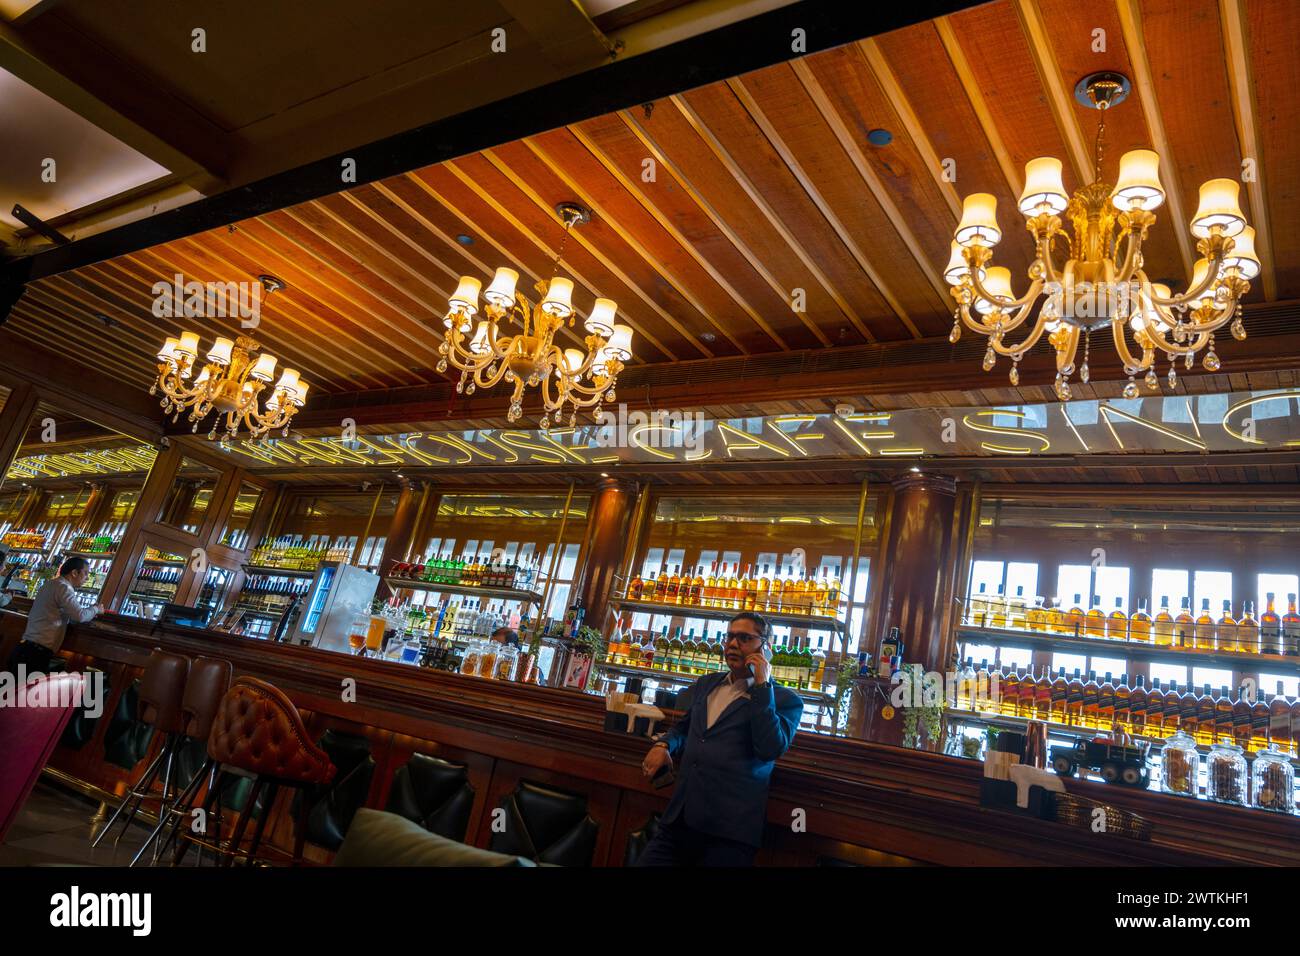 India, New Delhi, Connaught Place, Warehouse Cafe Stock Photo